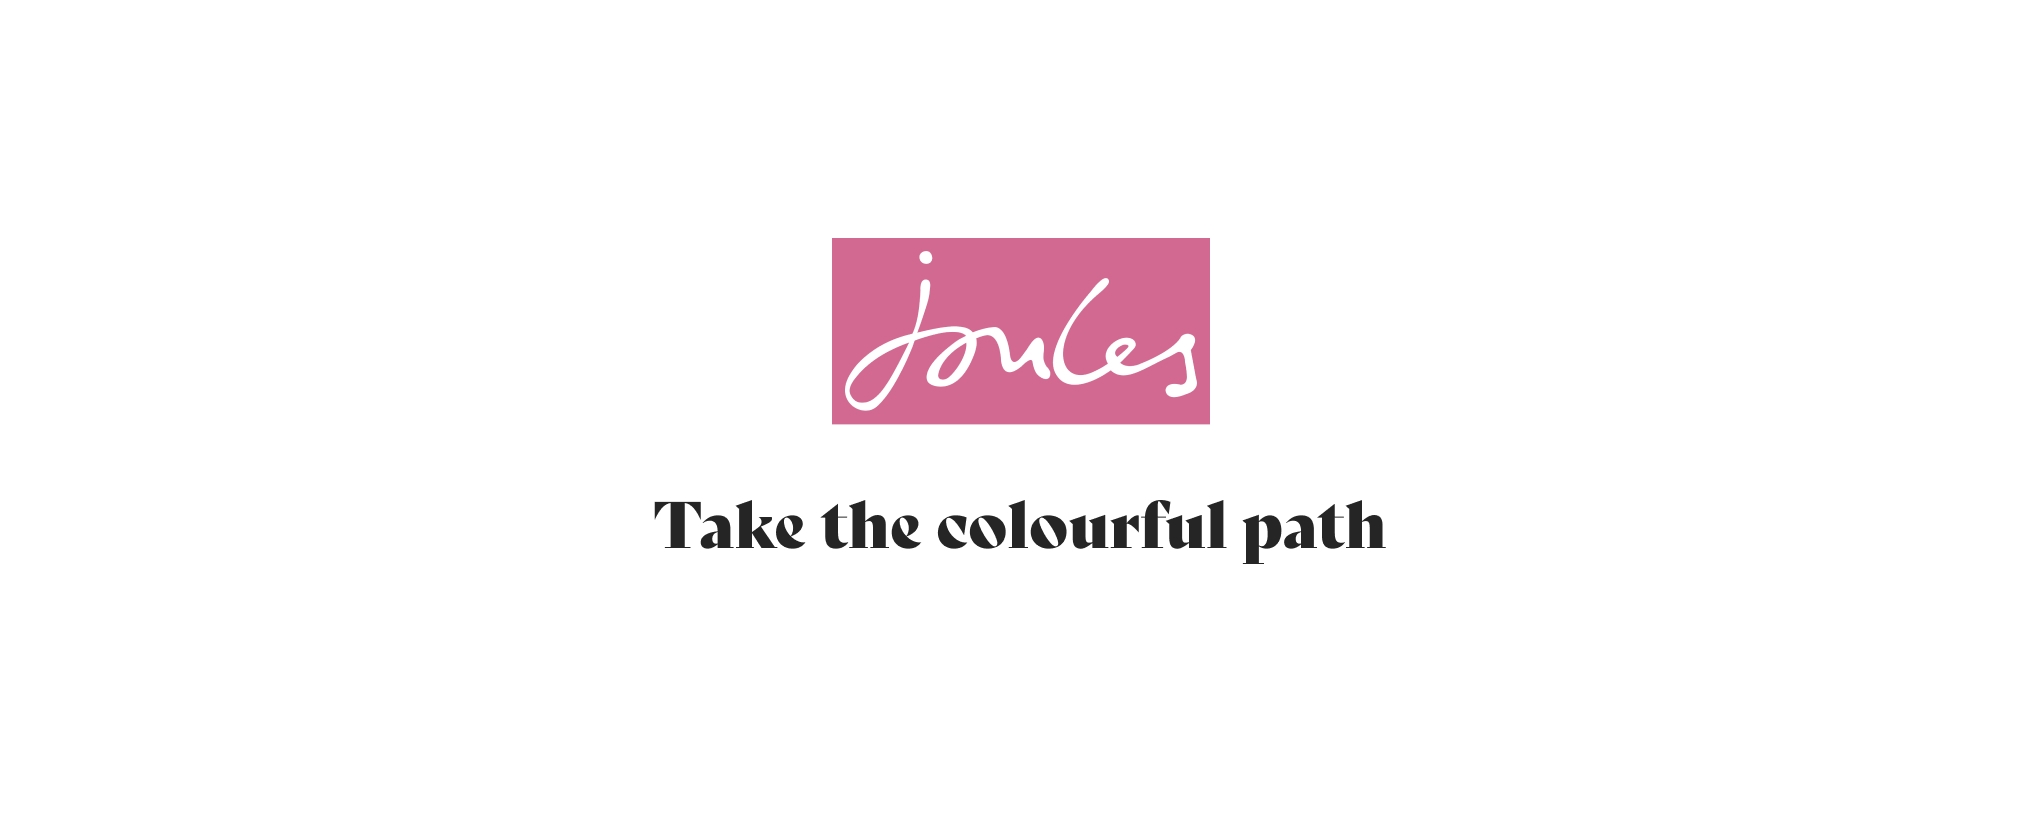 Joules - Take the colourful path